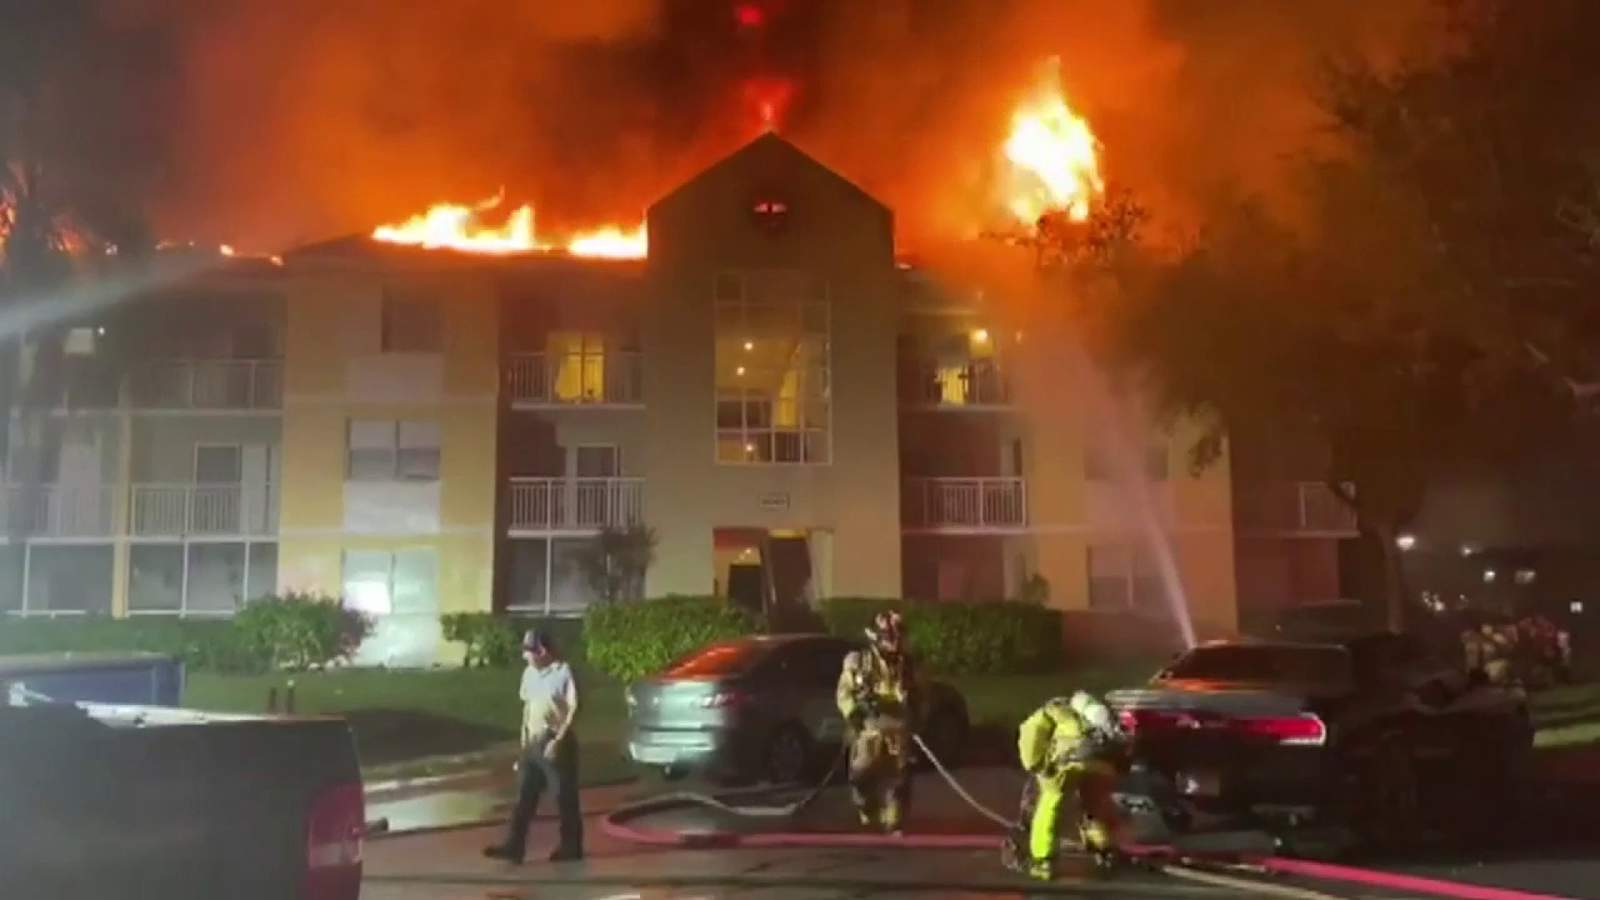 No major structural damage in Cutler Bay complex fire, officials say